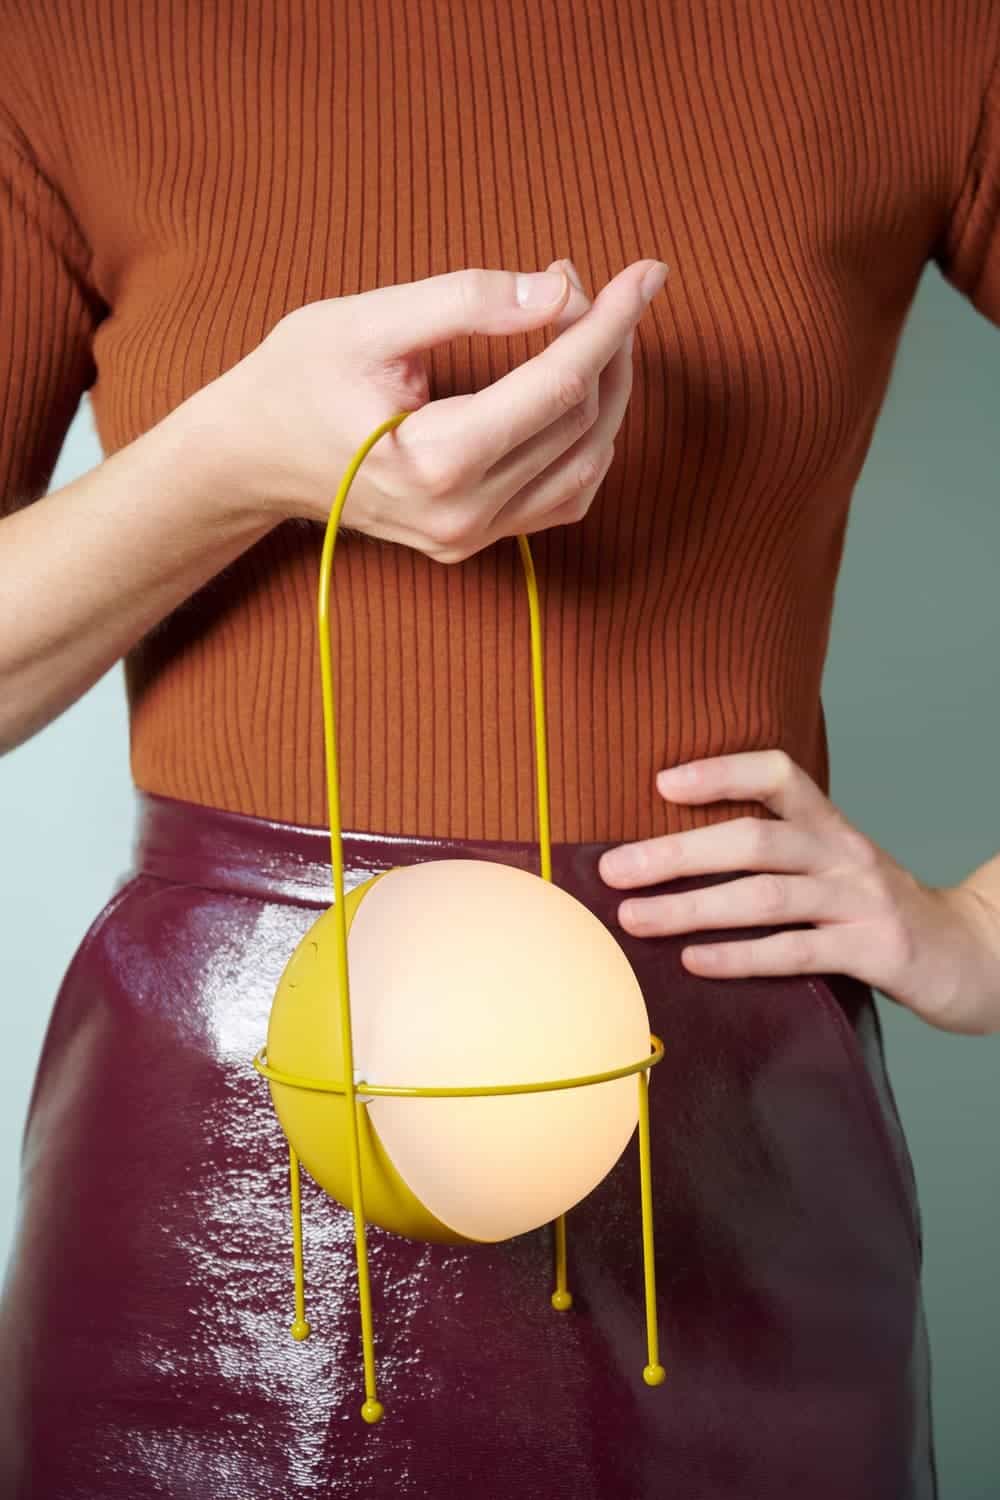 Elisa Ossino's “Wearable” Lamp for Ambientec